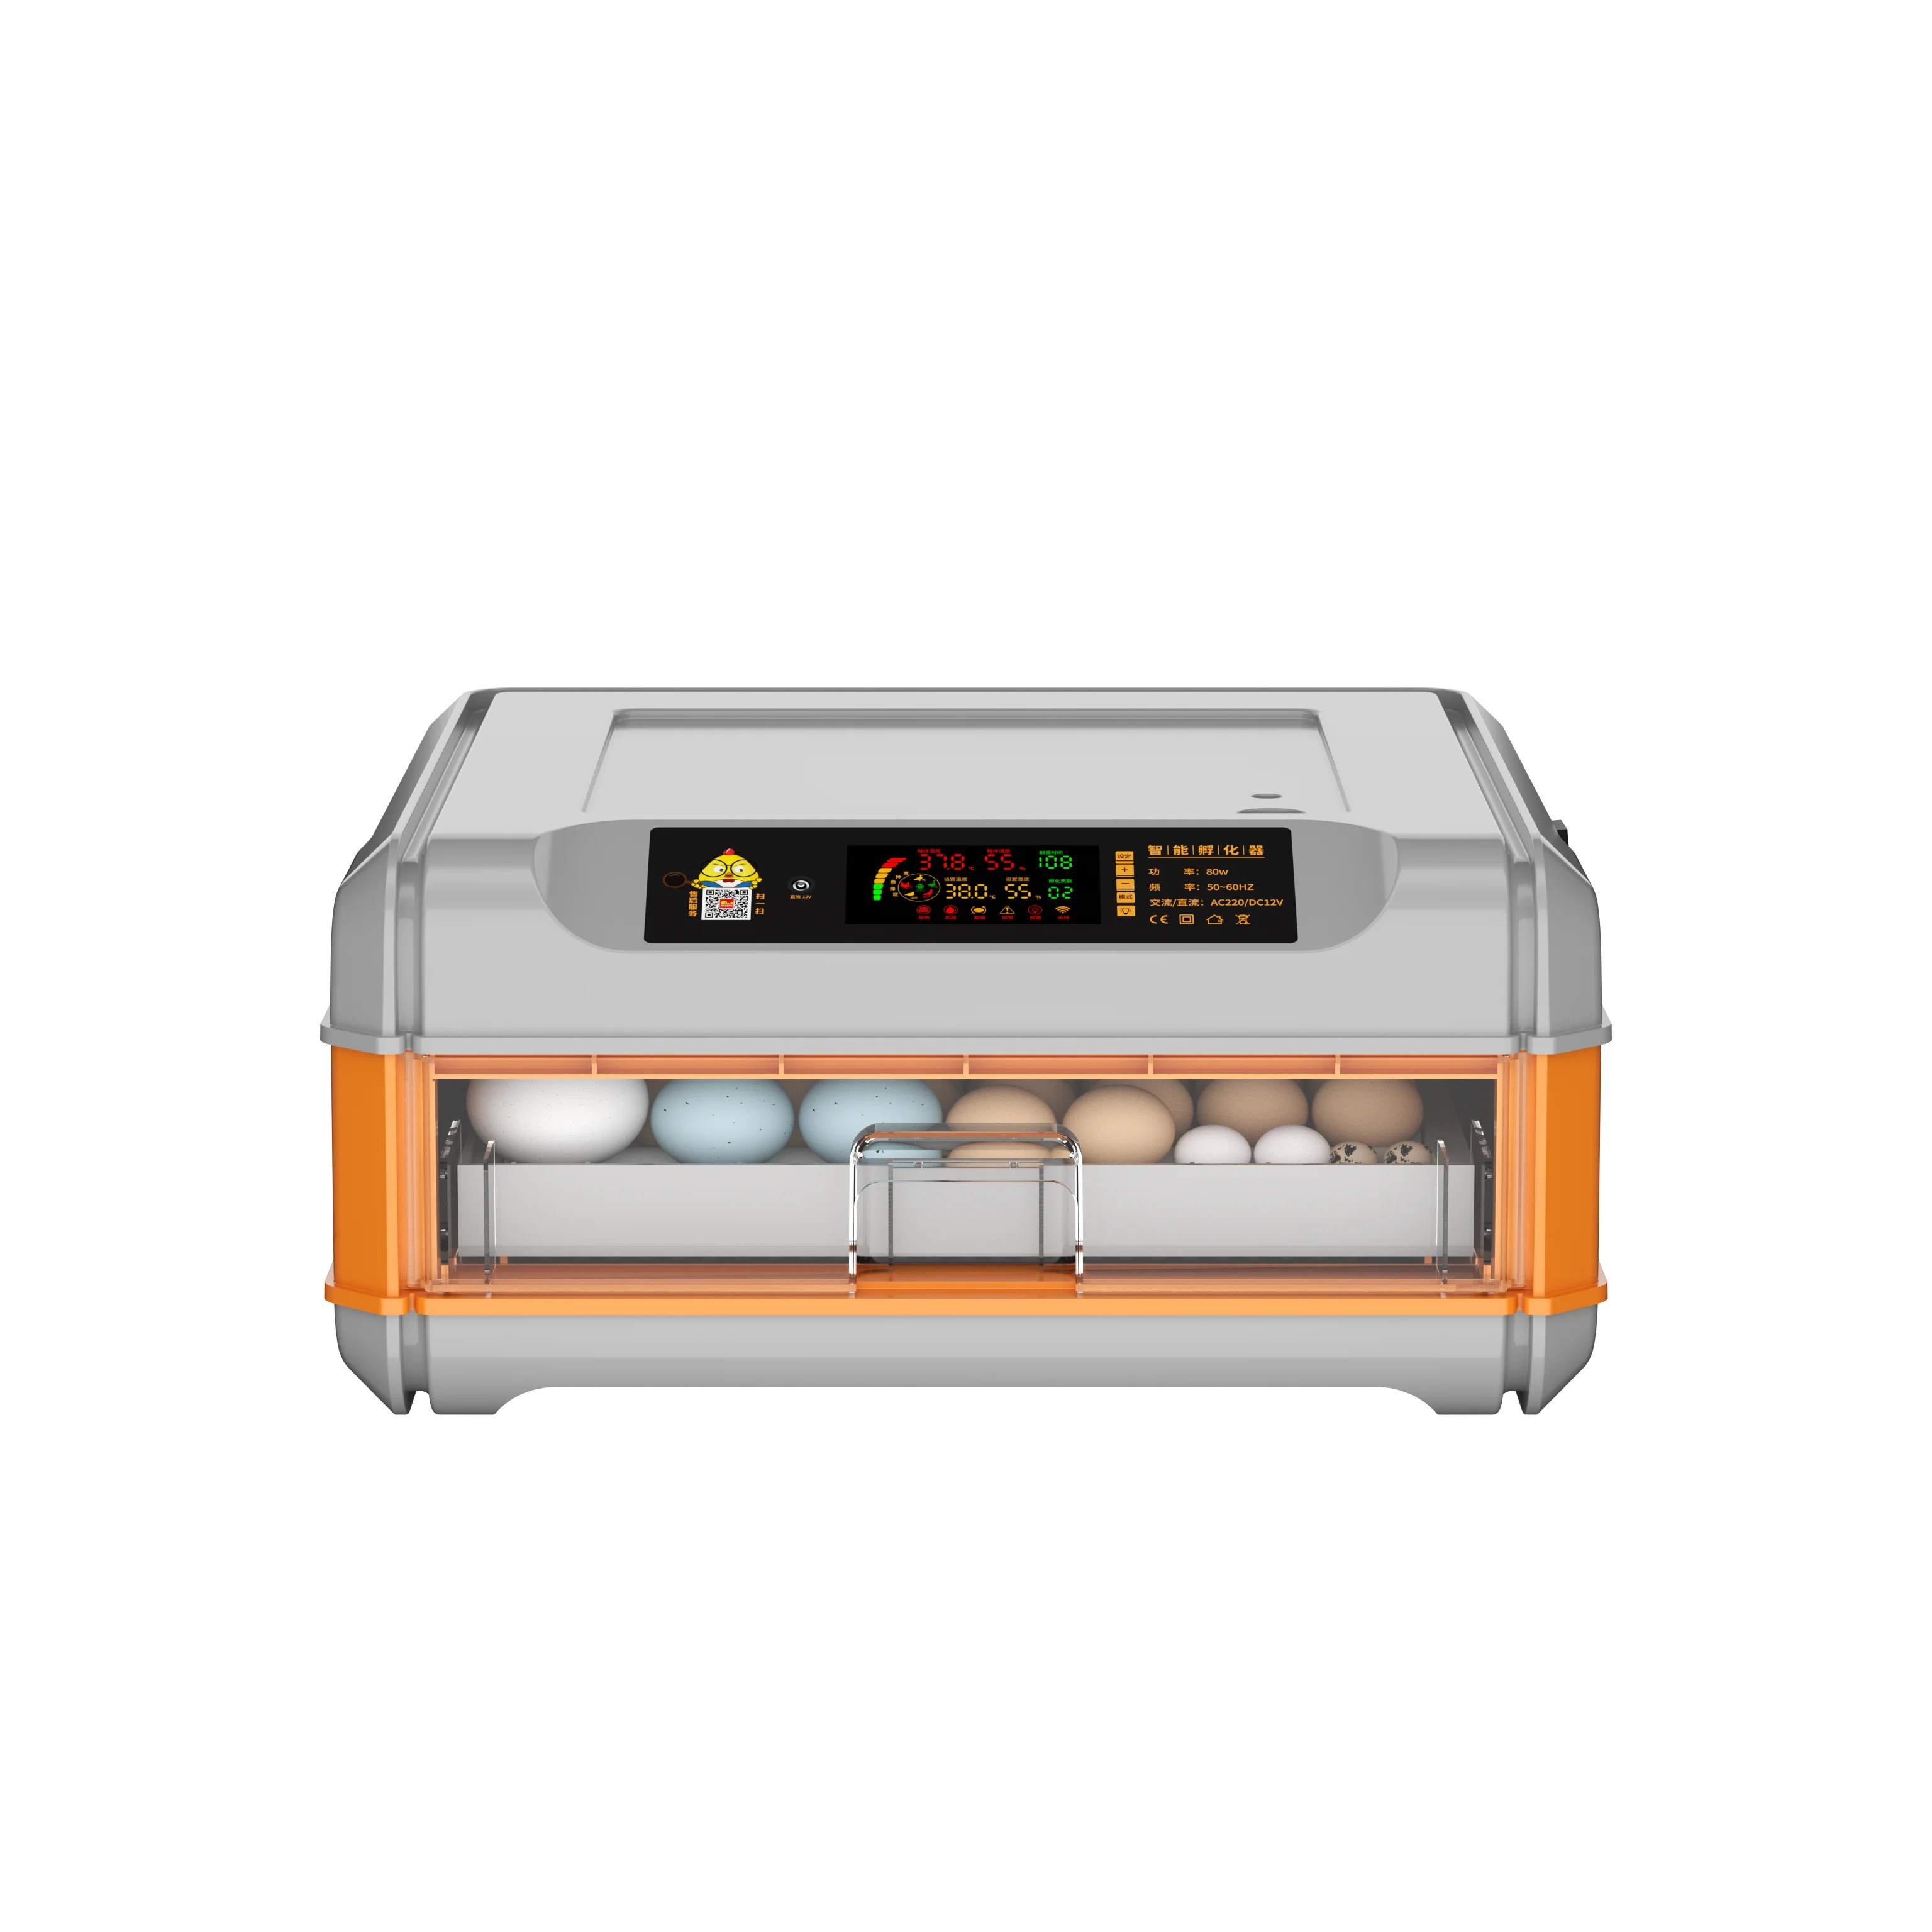 Fully Automatic 64 Chicken Eggs Capacity Poultry Eggs Incubator In Dubai